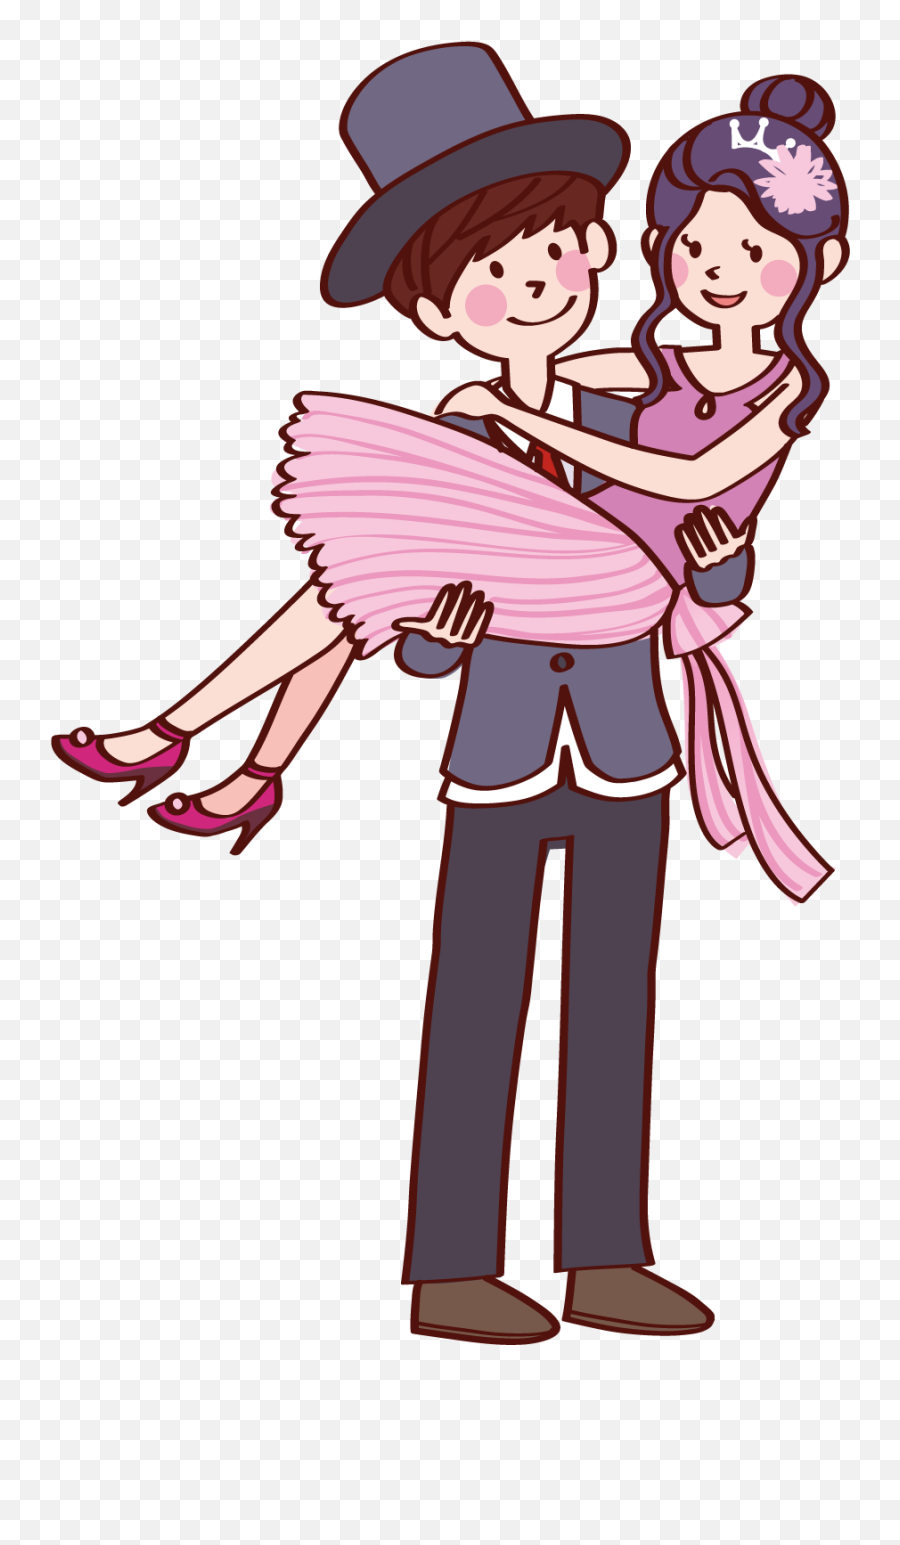 Couples Clip Fall In Love - Cute Couple Image Animated Png Love Couple Cartoon Png Emoji,Couple Emoji Png